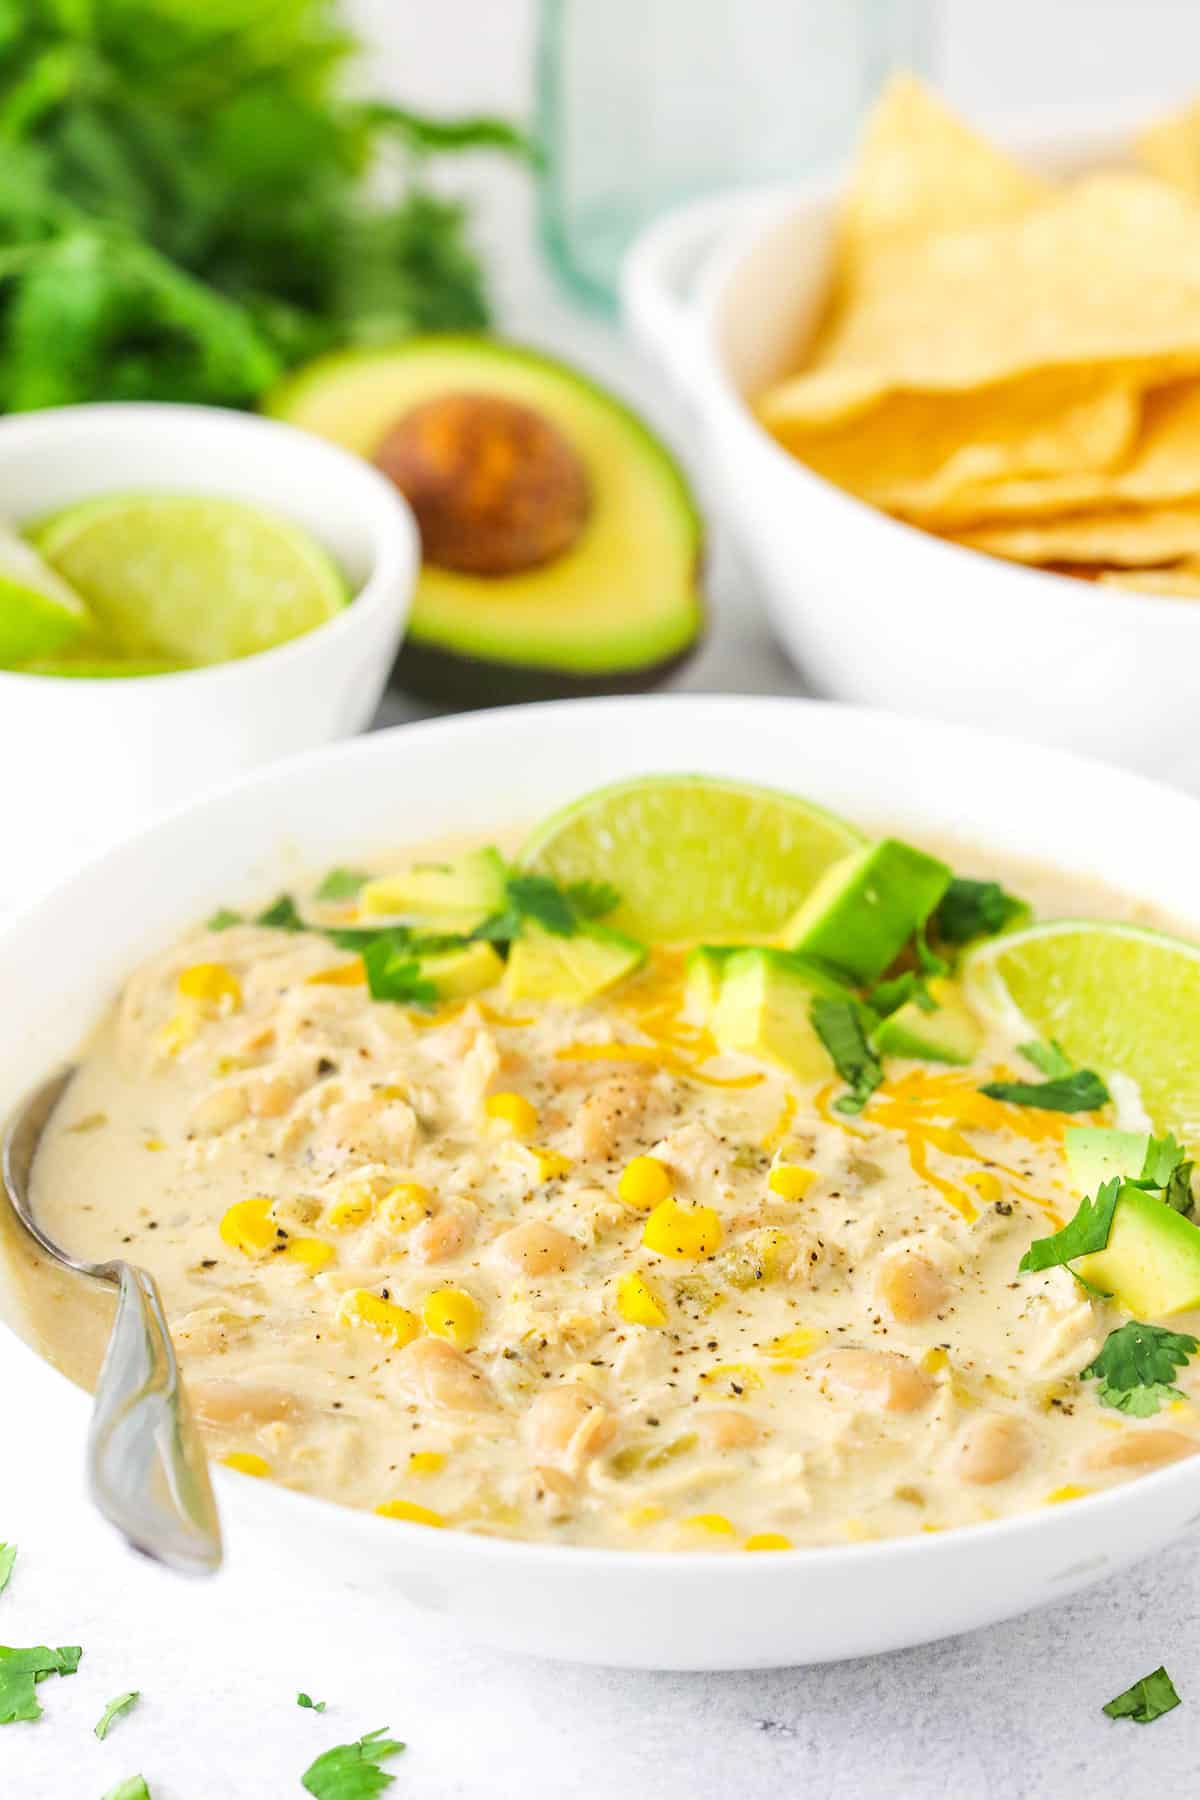 A Serving of White Chicken Chili with an Avocado and Tortilla Chips